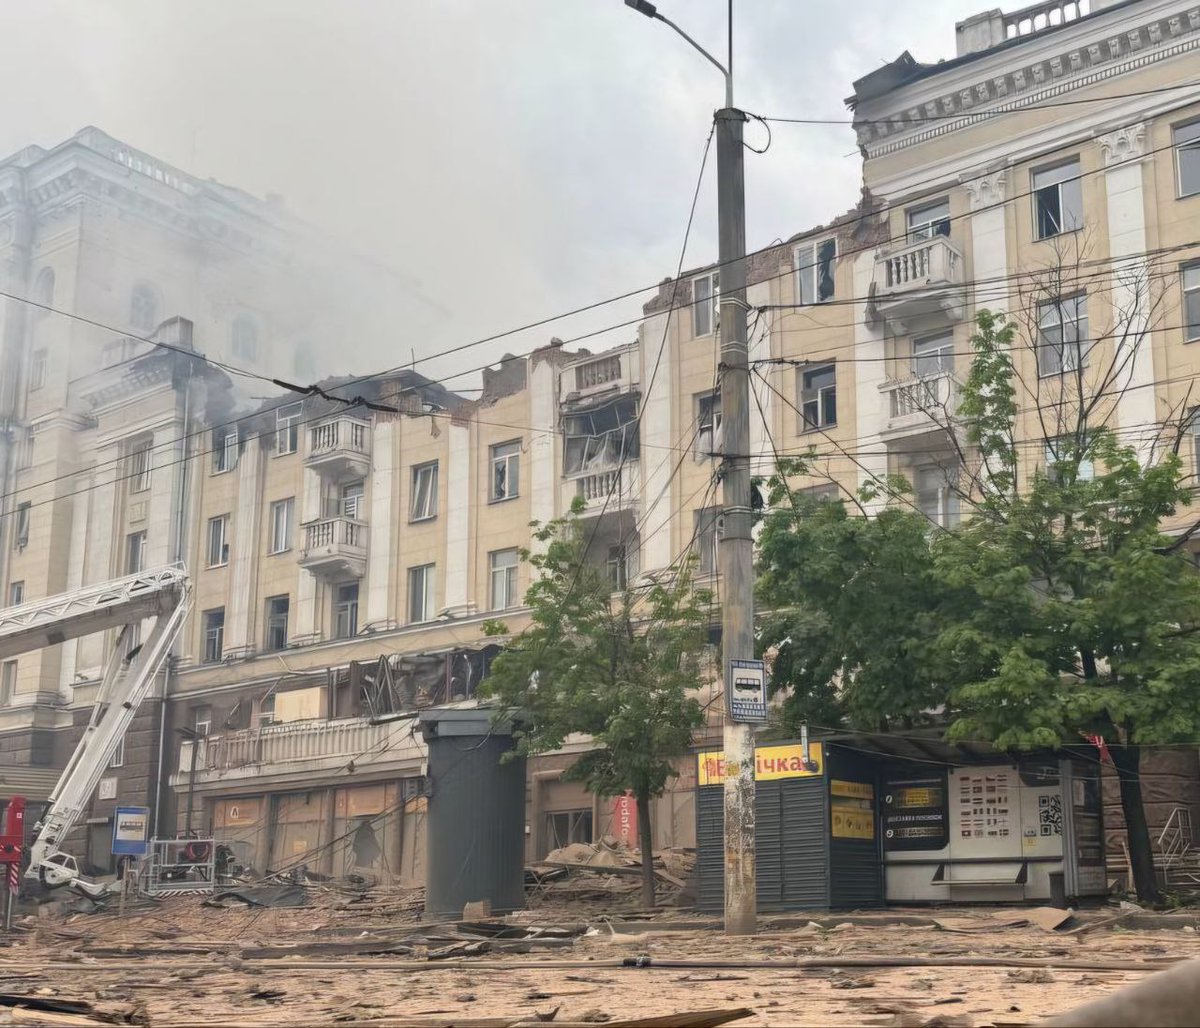 Russian missile strike on Dnipro city last night. We need air defense. Russia strikes innocent Ukrainian people Every. Single. Day. This is genocide. A residential building in Dnipro city center was hit. As of now, 15 people were reported injured - regional administration. The